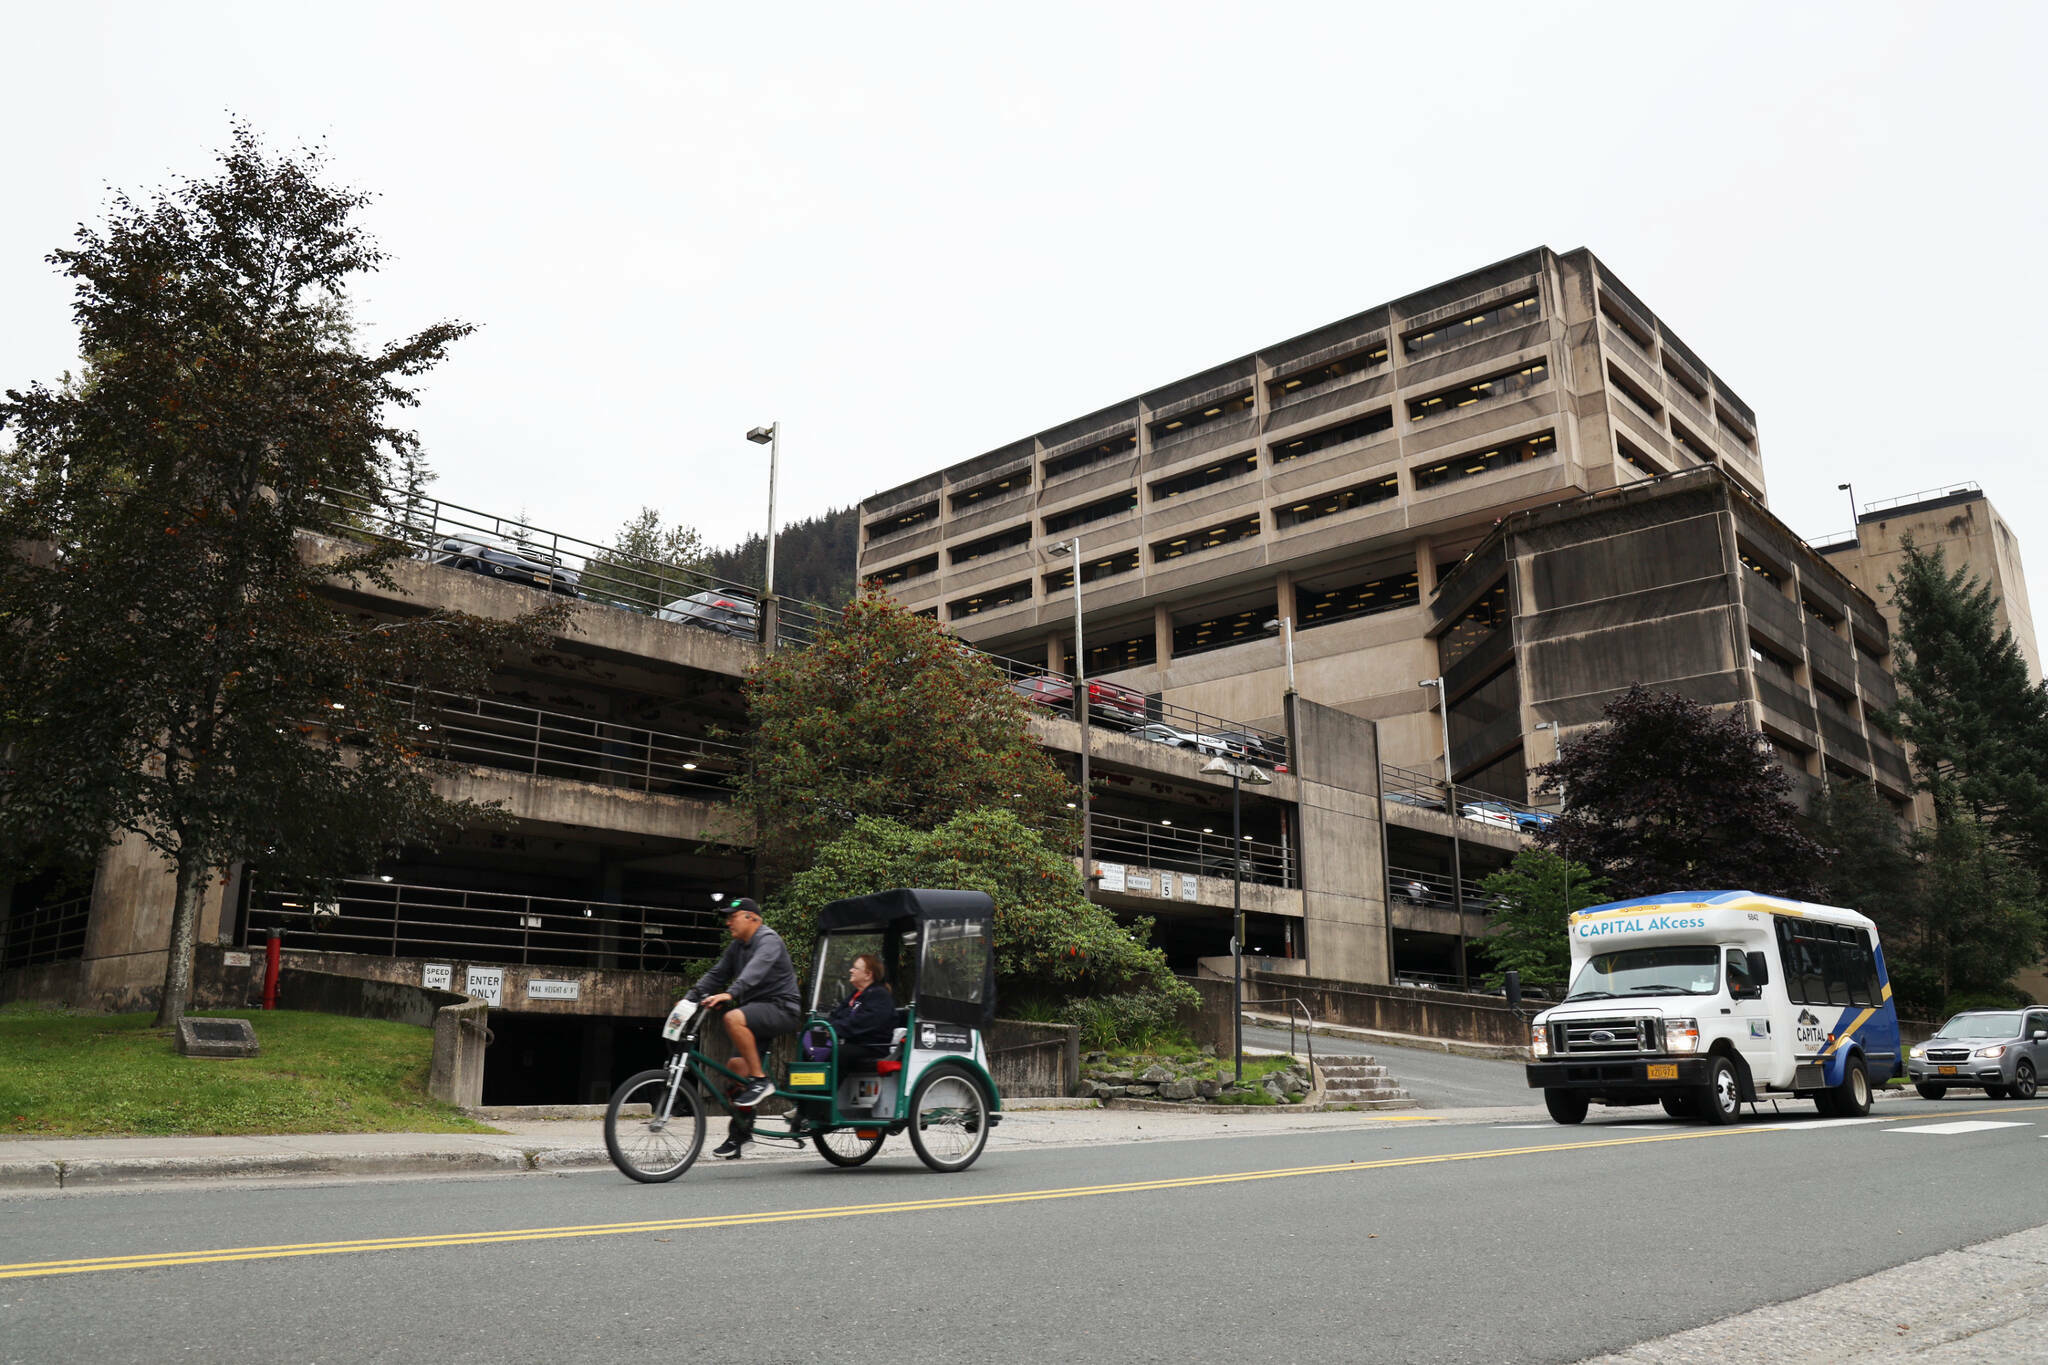 A cycle rickshaw passes the North State Office Building parking garage located on Willoughby Avenue in downtown Juneau in September. A $30 million request to pay for upgrades to the parking garage tied for first on a list of requests for state legislative funding as ranked by Juneau Assembly members. Assembly Member Alicia Hughes-Skandijs said expanding parking there can free up other downtown space for housing and other development, which is a top overall goal of city leaders. The parking upgrade is officially ranked second on the list since a request to further development of the Pederson Hill Subdivision had a higher ranking on last year’s priority list. (Clarise Larson / Juneau Empire)